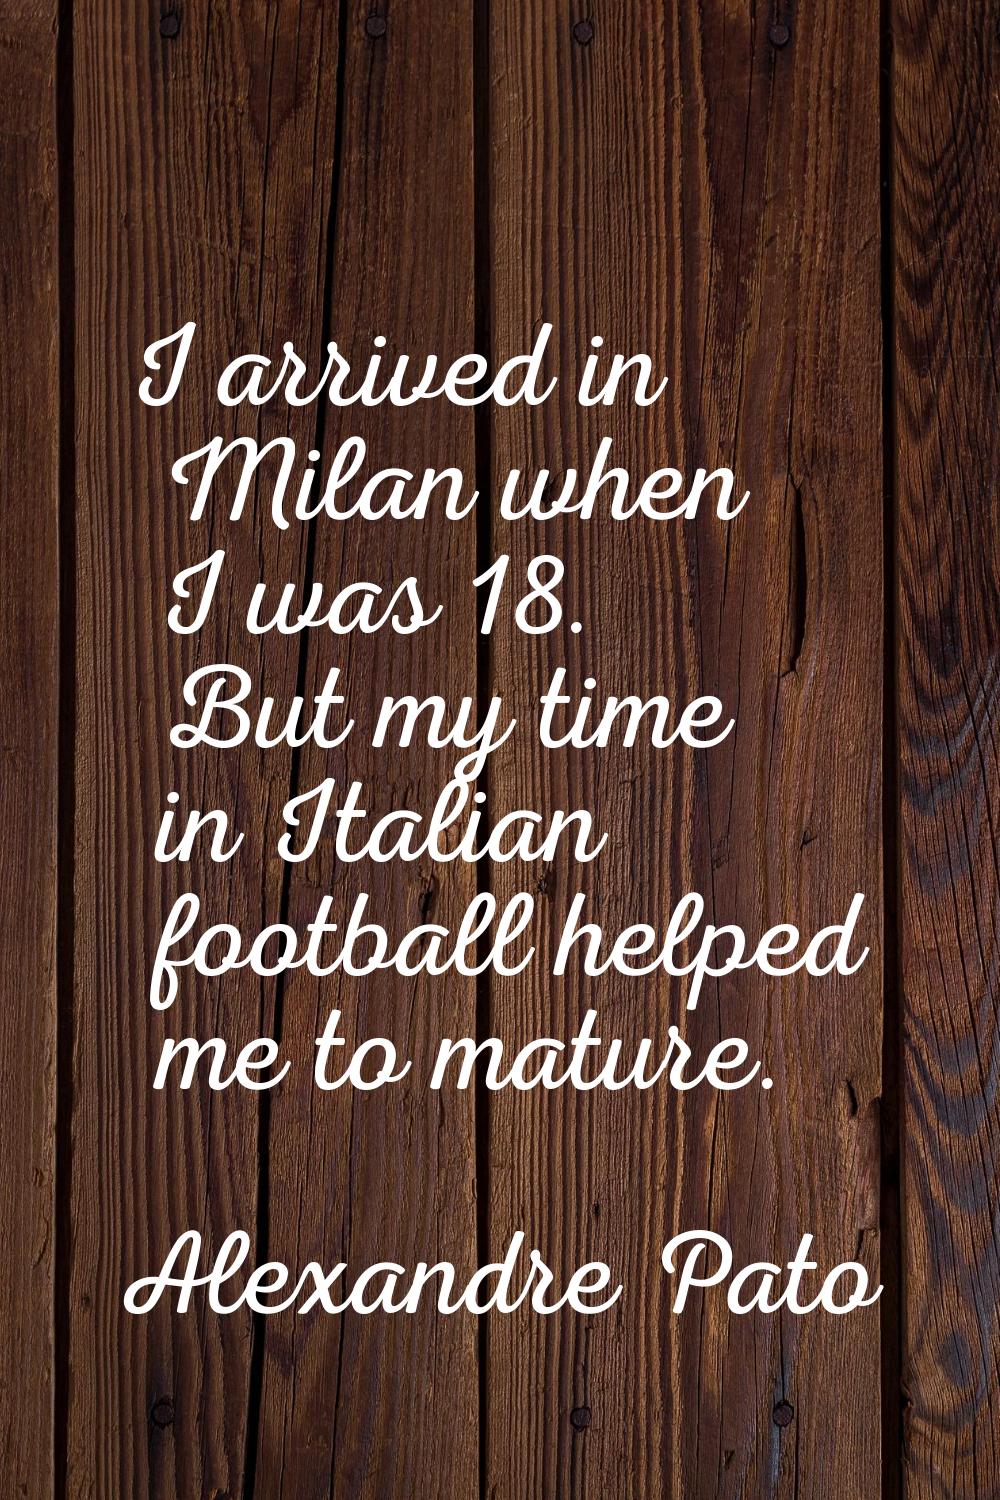 I arrived in Milan when I was 18. But my time in Italian football helped me to mature.